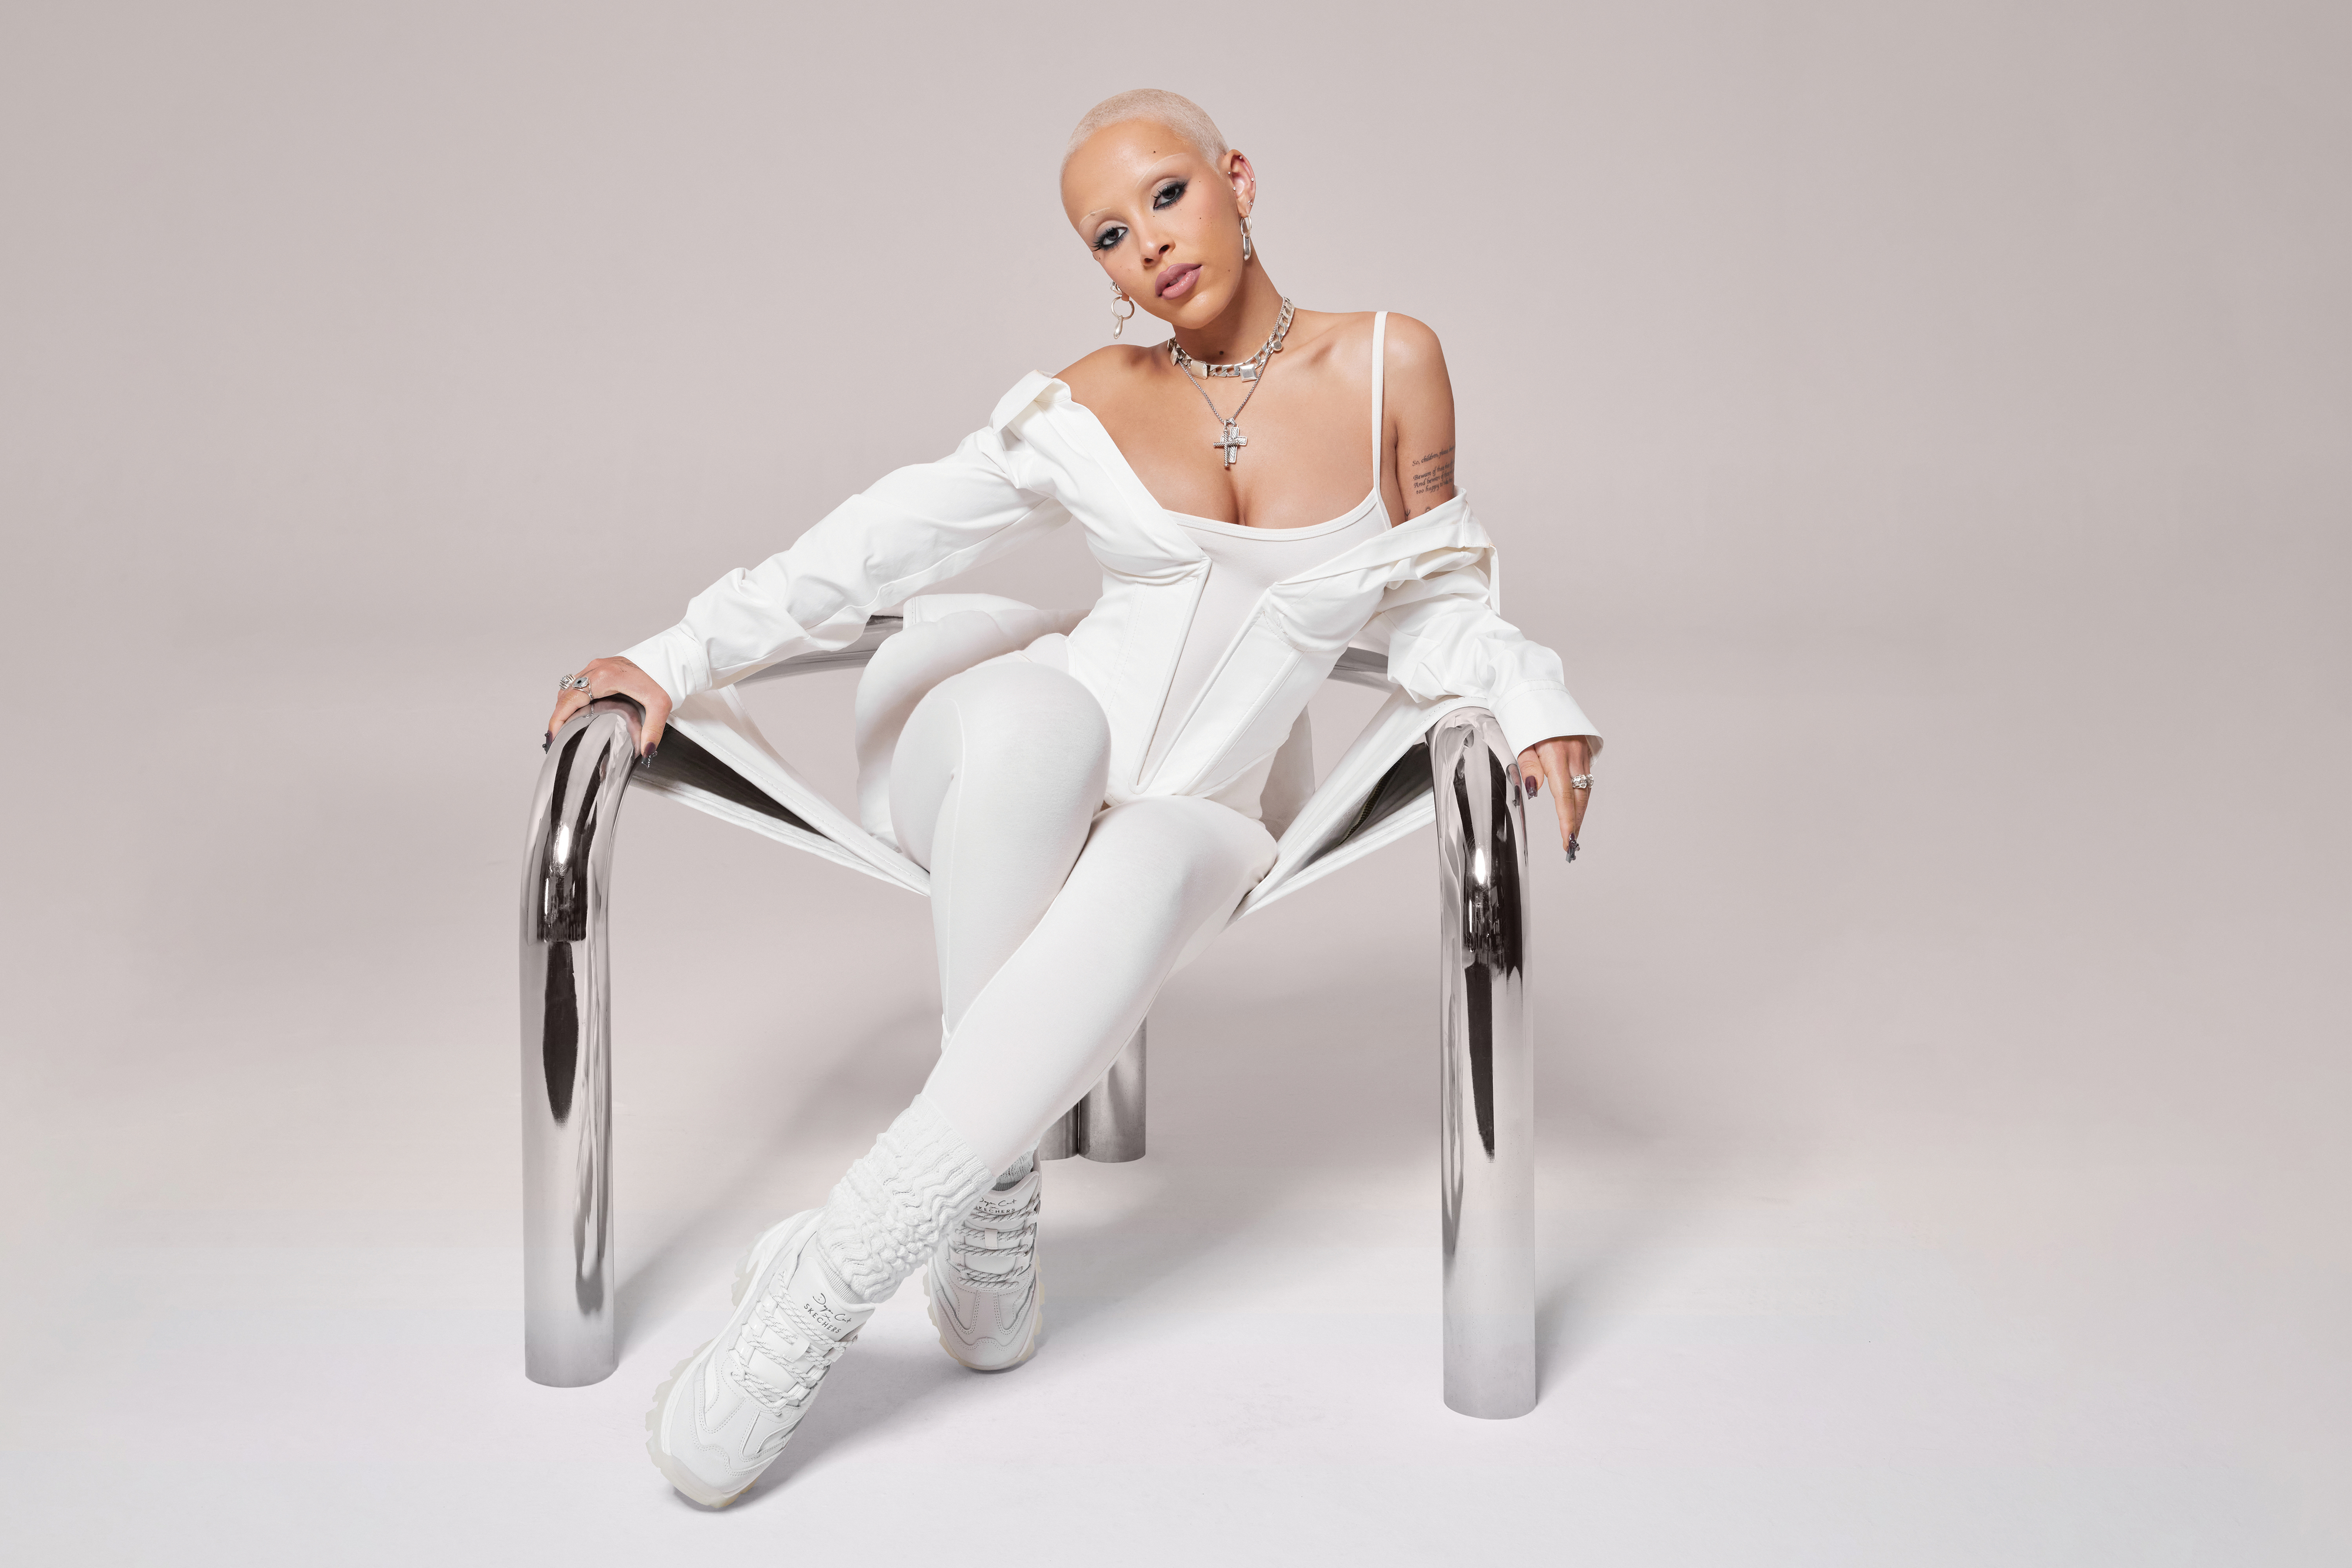 Meaning of Balut as Doja Cat drops new song ahead of Scarlet's release